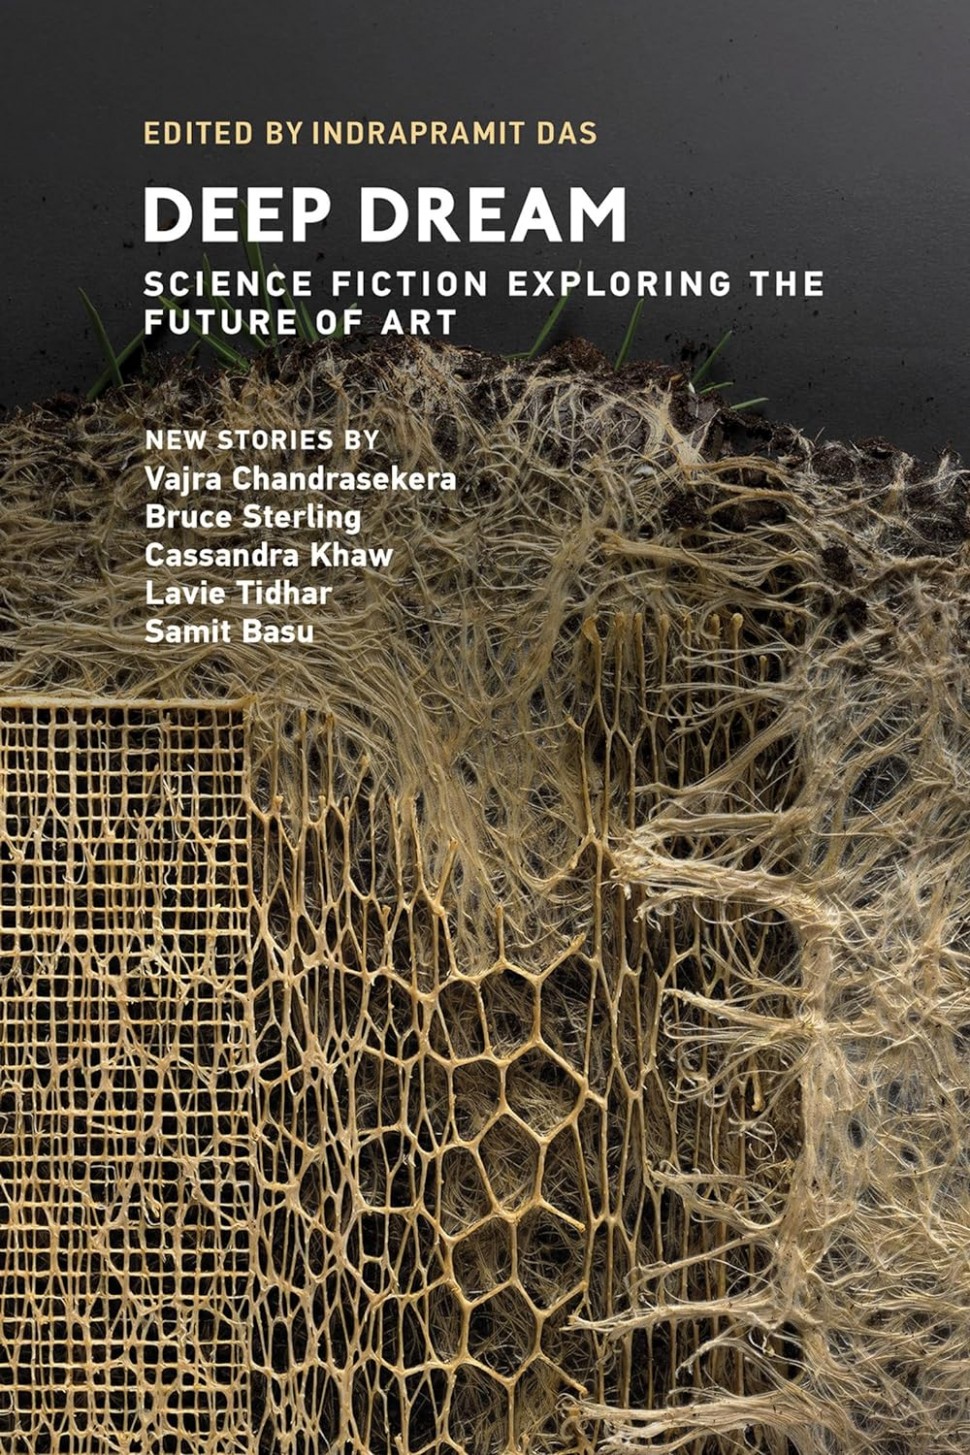 Book cover: showing a honeycomb-like structure made out of root fibers, resembling a grid that spreads and breaks into a more chaotic, web-like pattern. Text reads 'Edited by Indrapramit Das, Deep Dream, Science Fiction Exploring the Future of Art, New Stories by, Vajra Chandrasekera, Bruce Sterling, Cassandra Khaw, Lavie Tidhar, Samit Basu